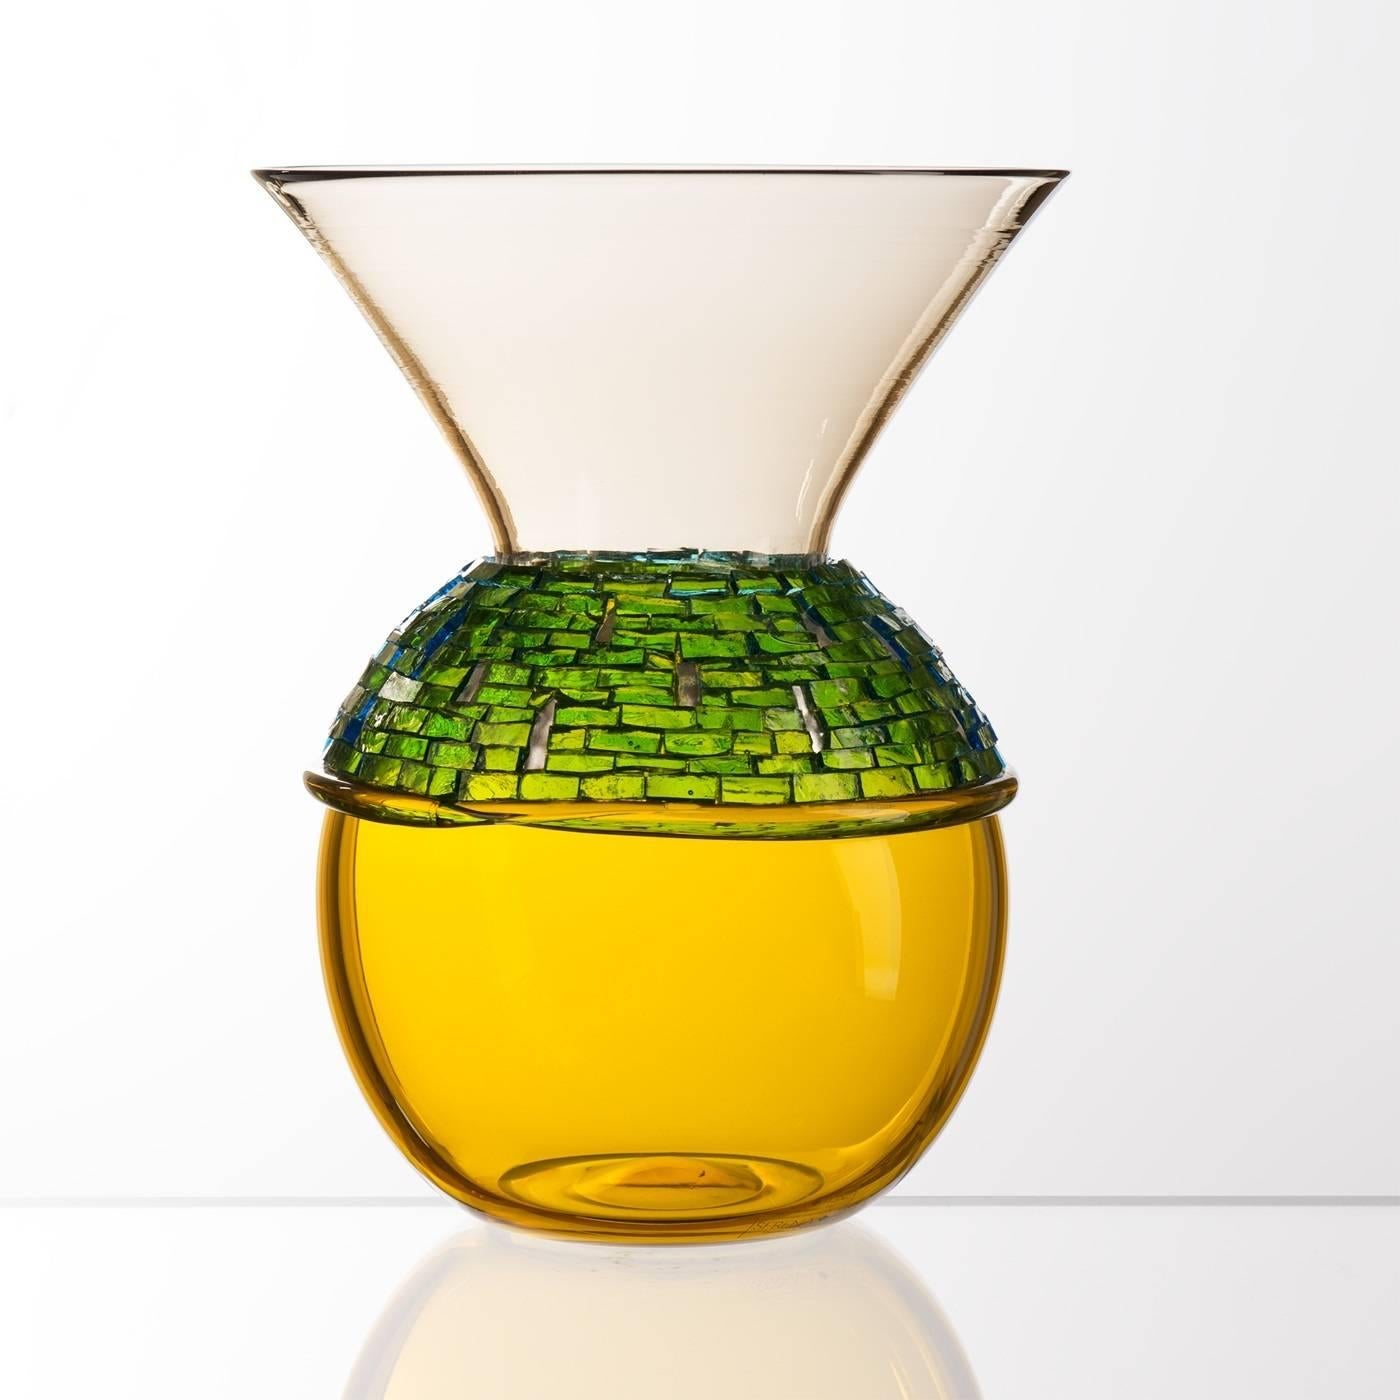 This vase is part of the design collection and was mouth-blown in Murano using the “incalmo” technique, consisting in joining two glass pieces of different colors, in this case yellow and tinted, while they're still hot to obtain a single blown